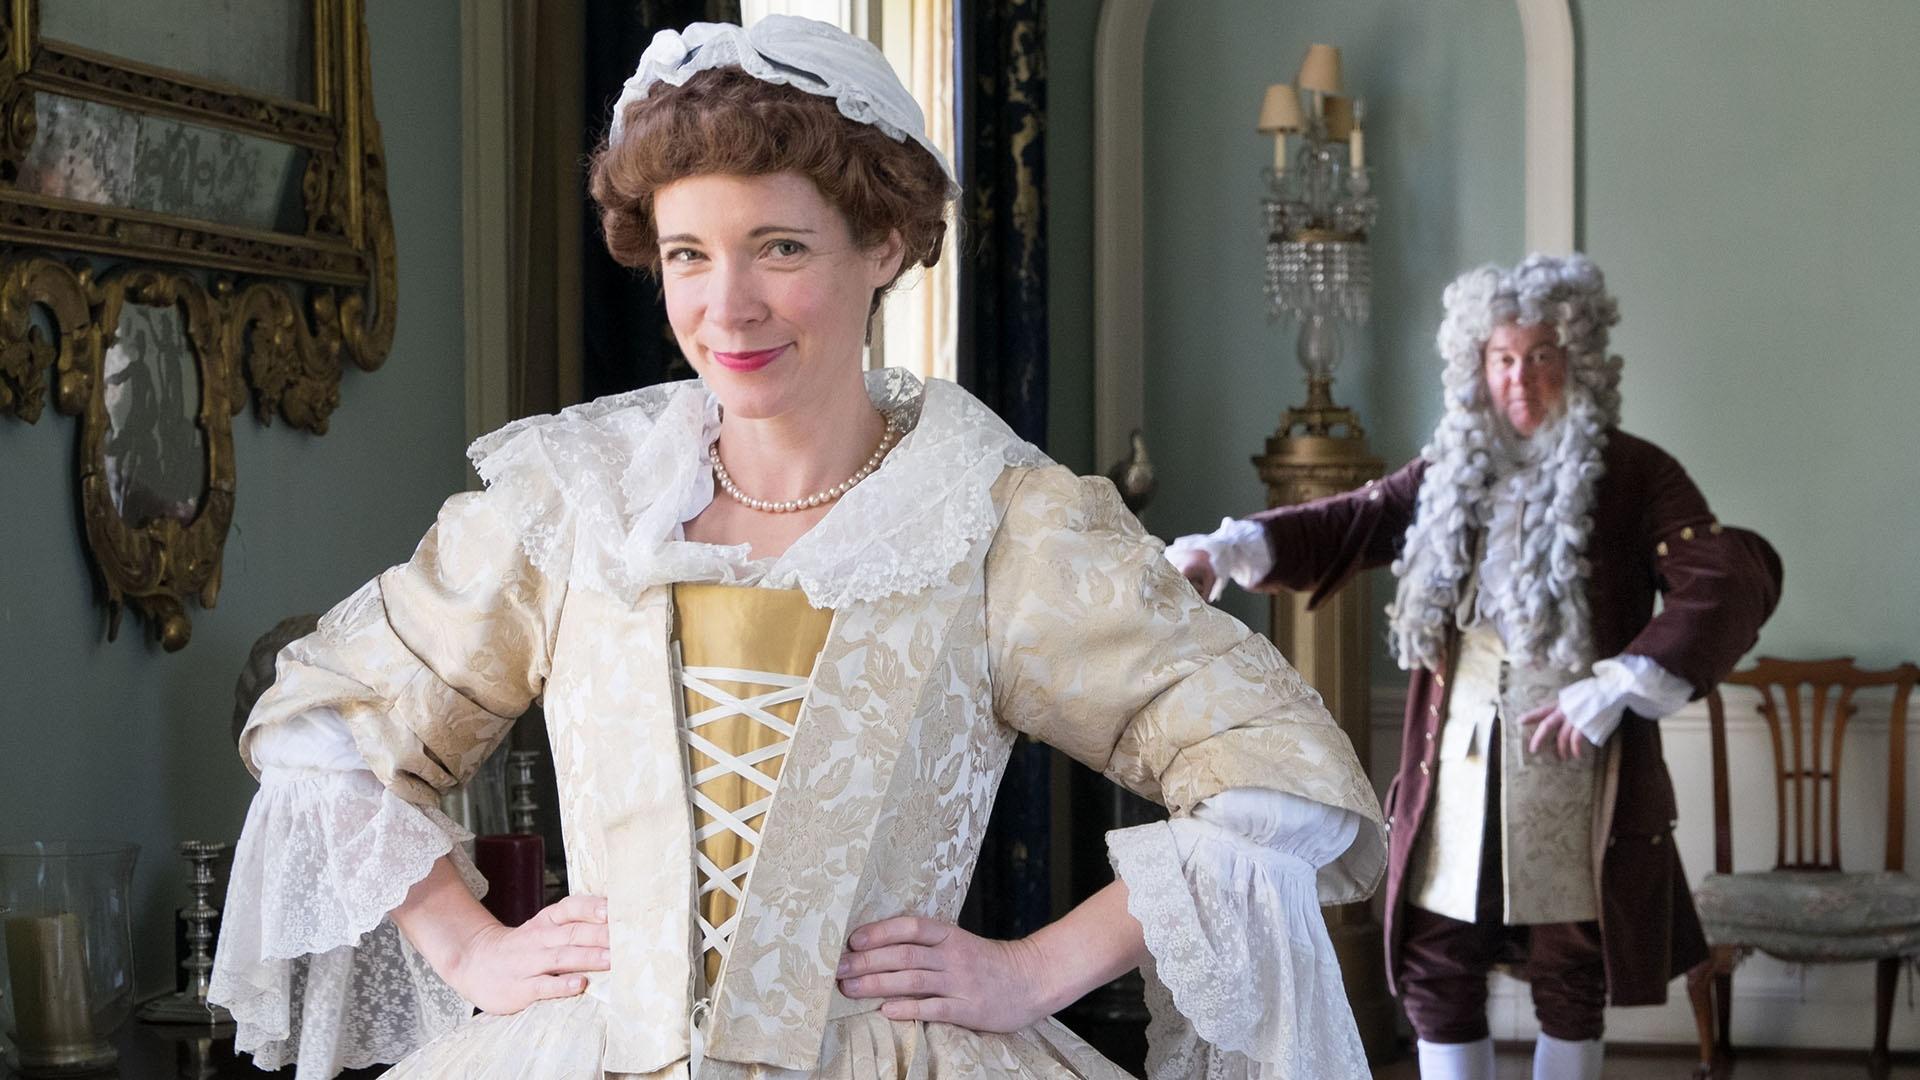 Lucy Worsley dressed in period costume.